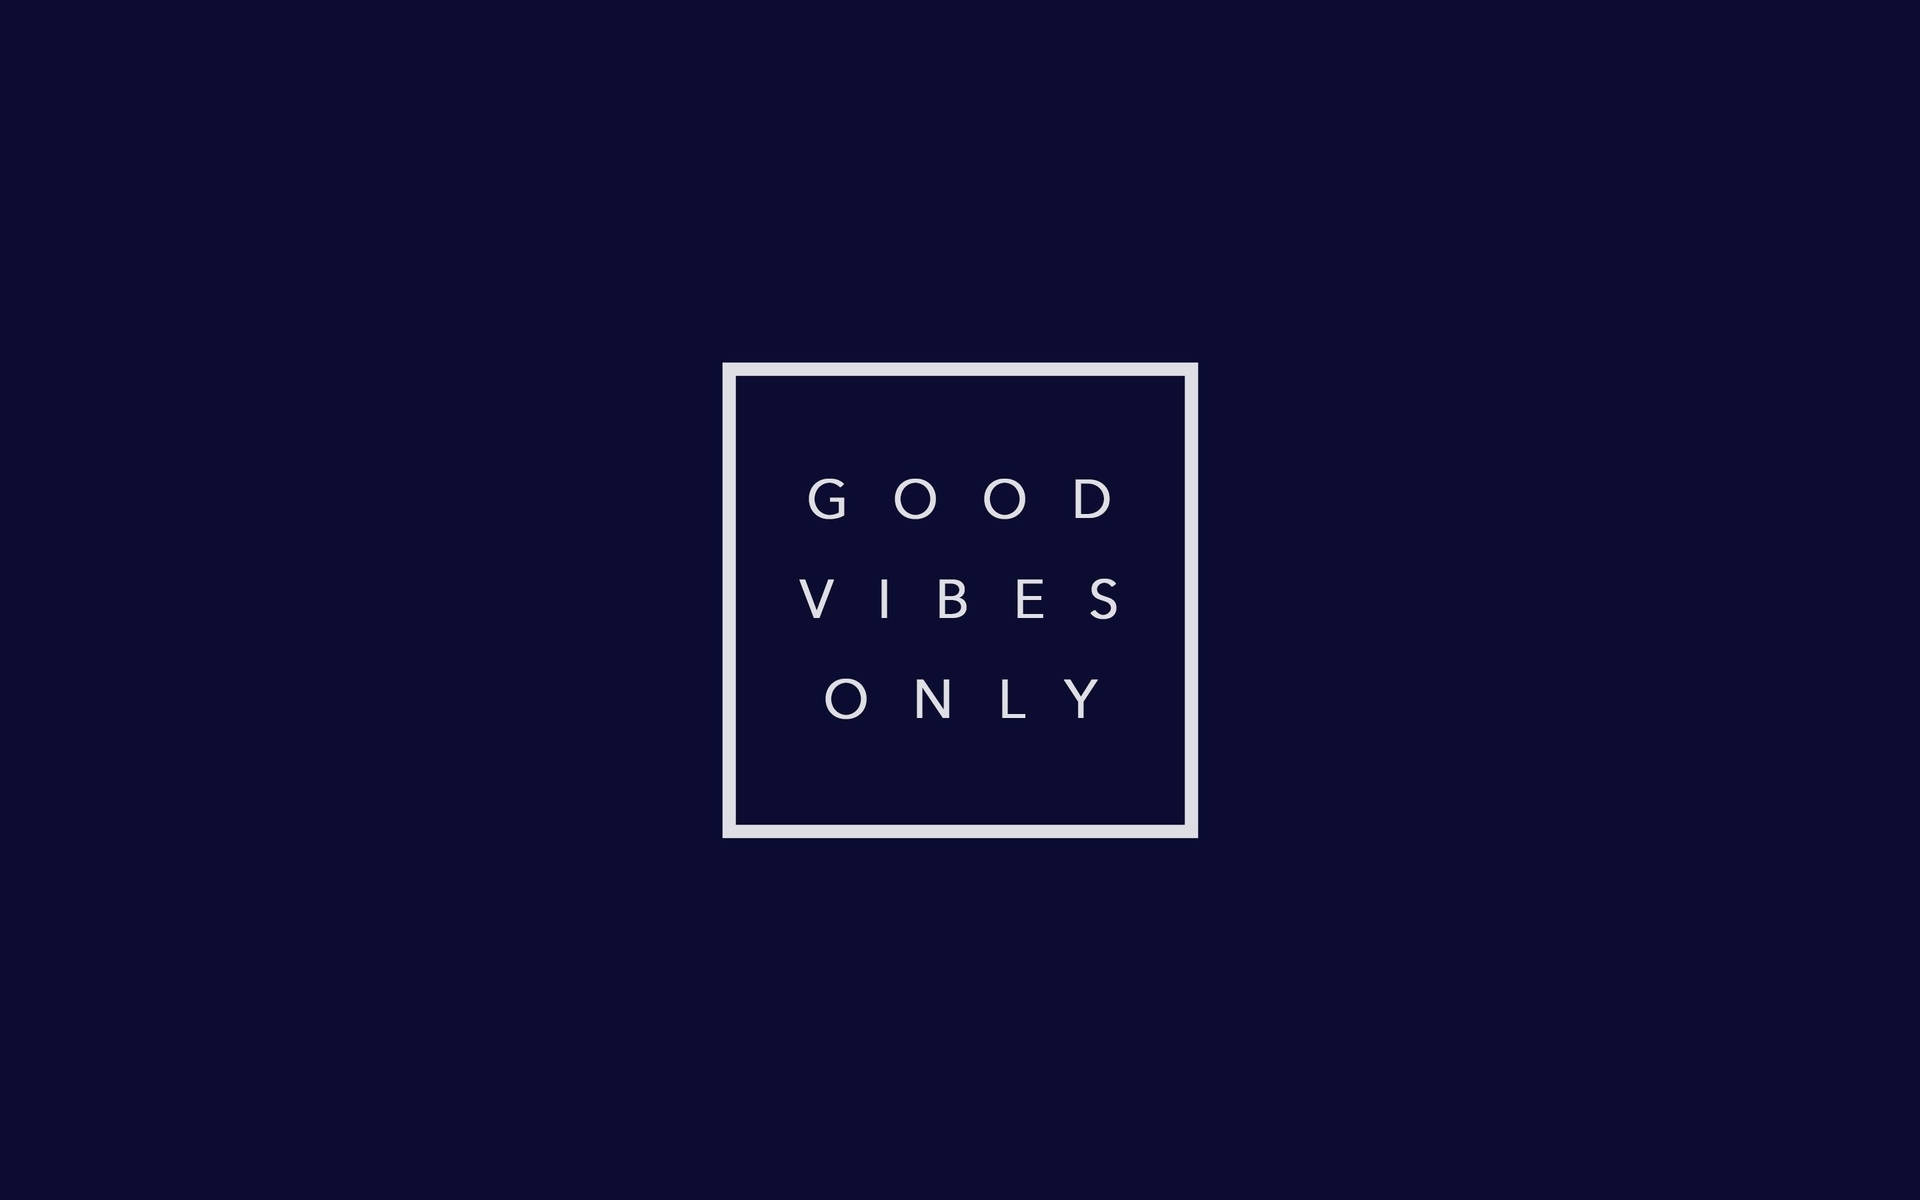 Good Vibes Only - A White Square On A Dark Background Background